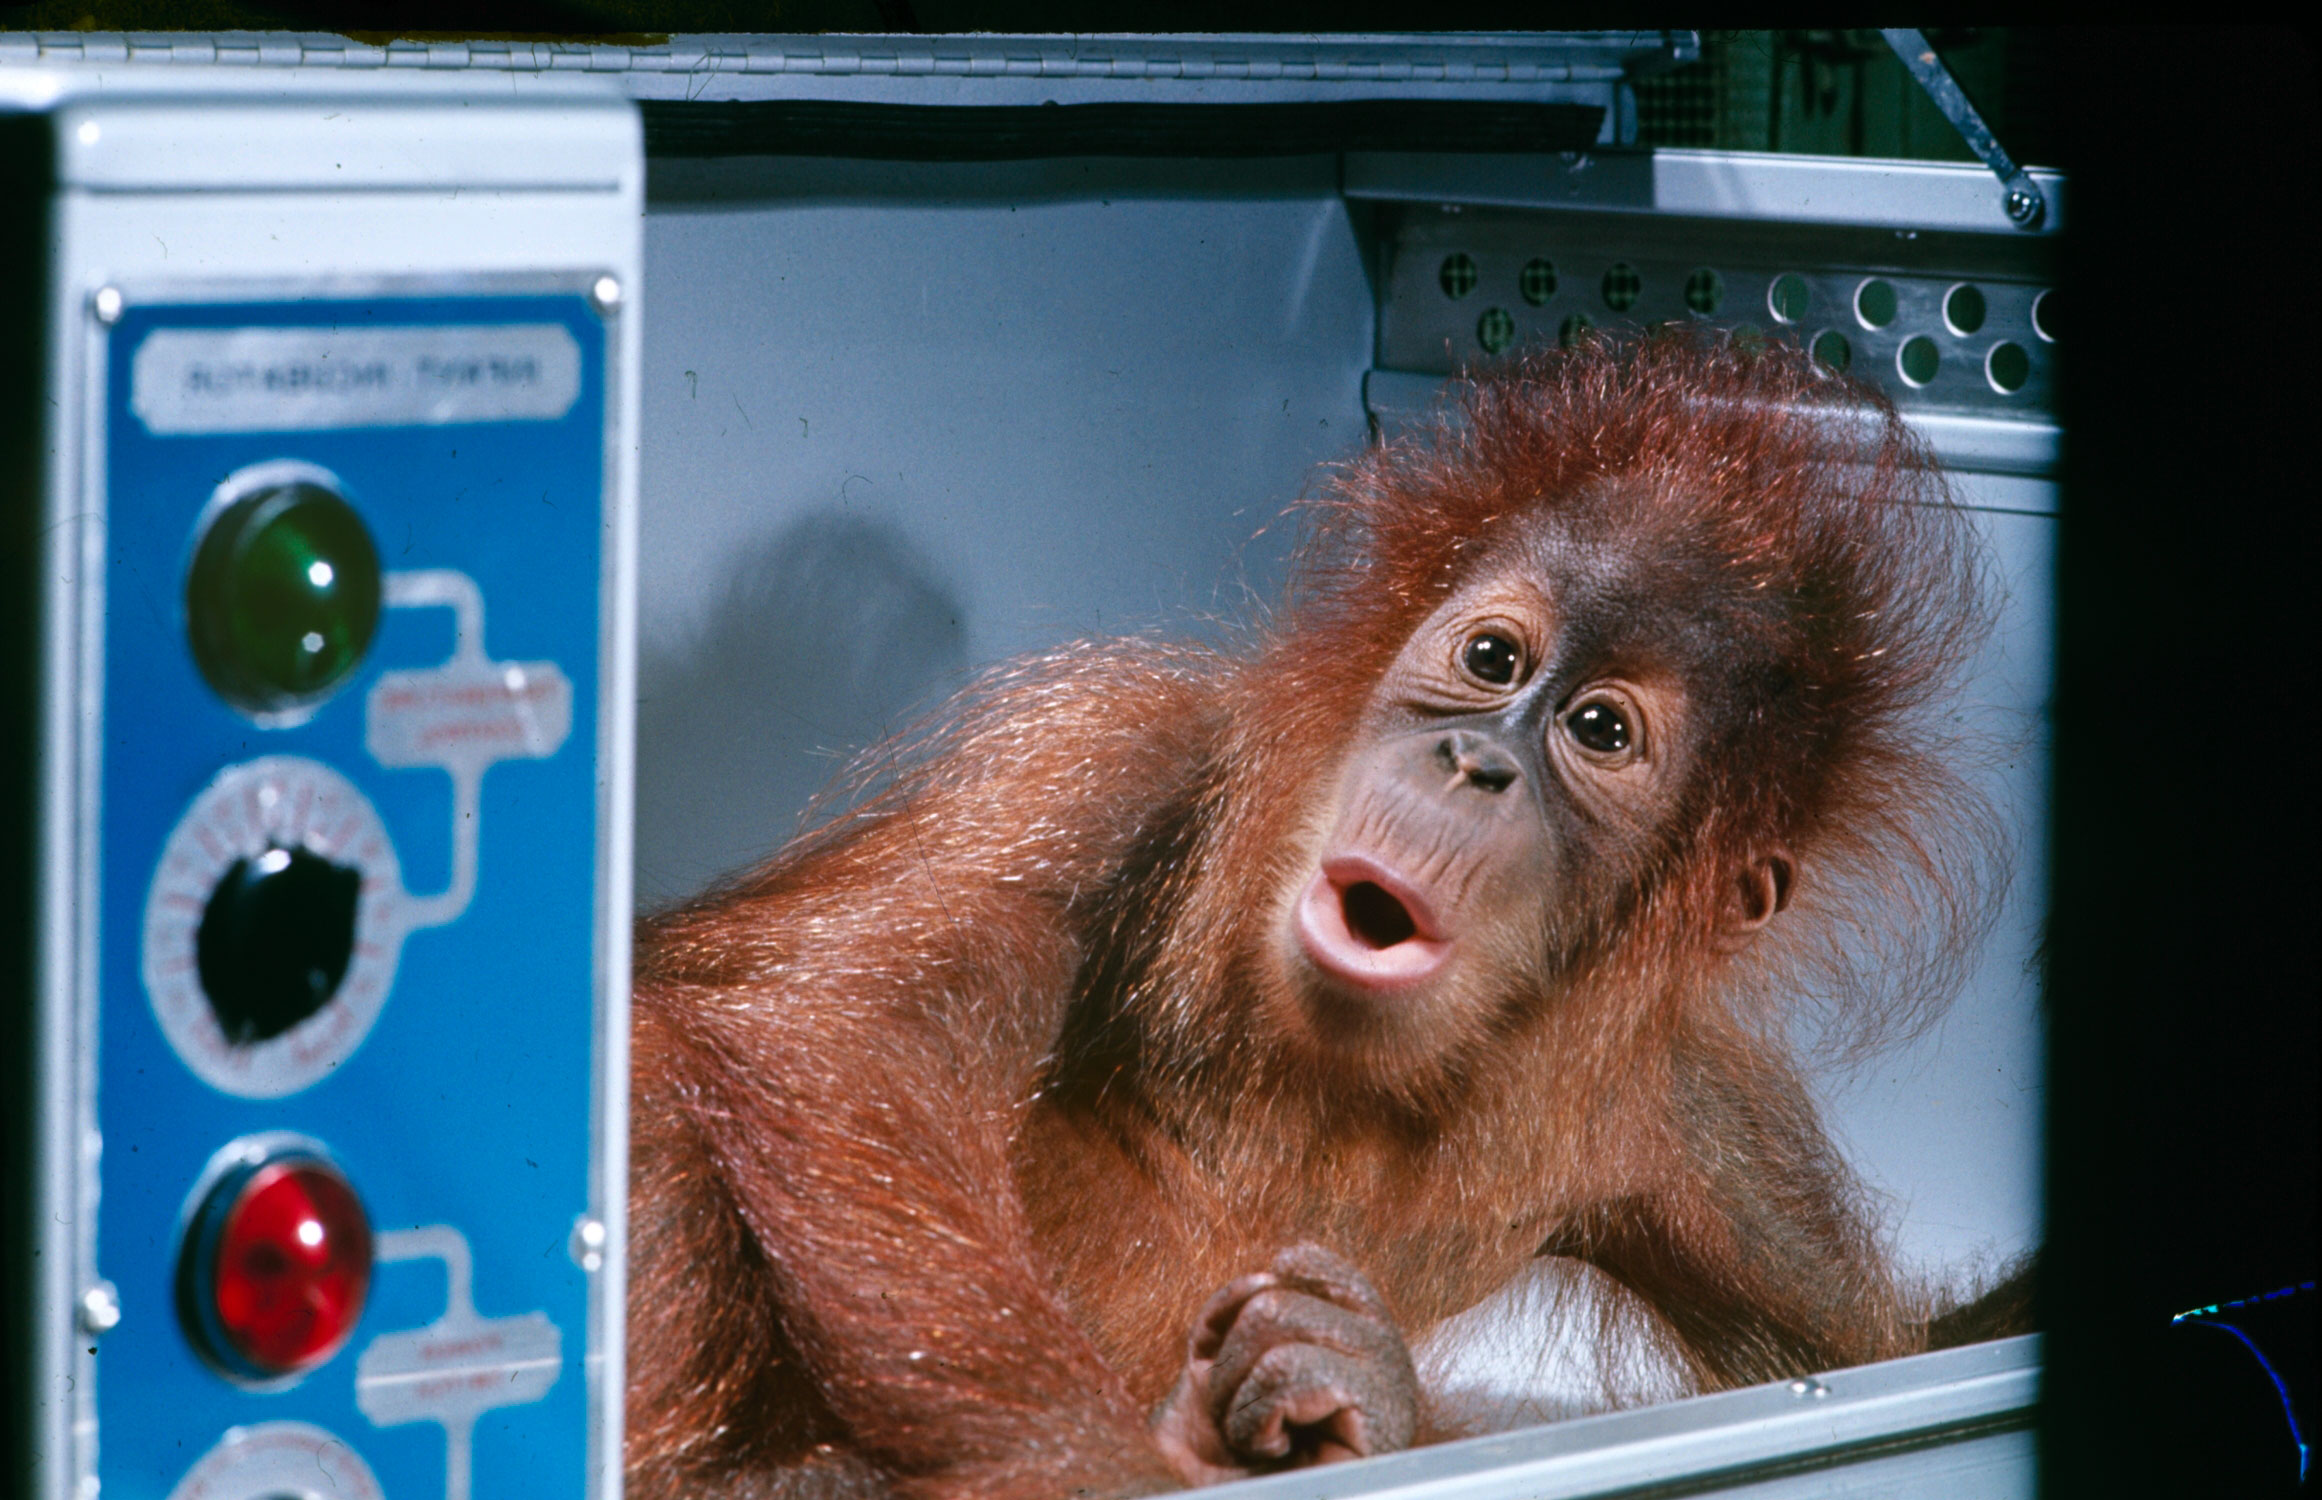 Henry, a 12-pound orangutan at the St. Louis zoo, wakes from a nap in his incubator.